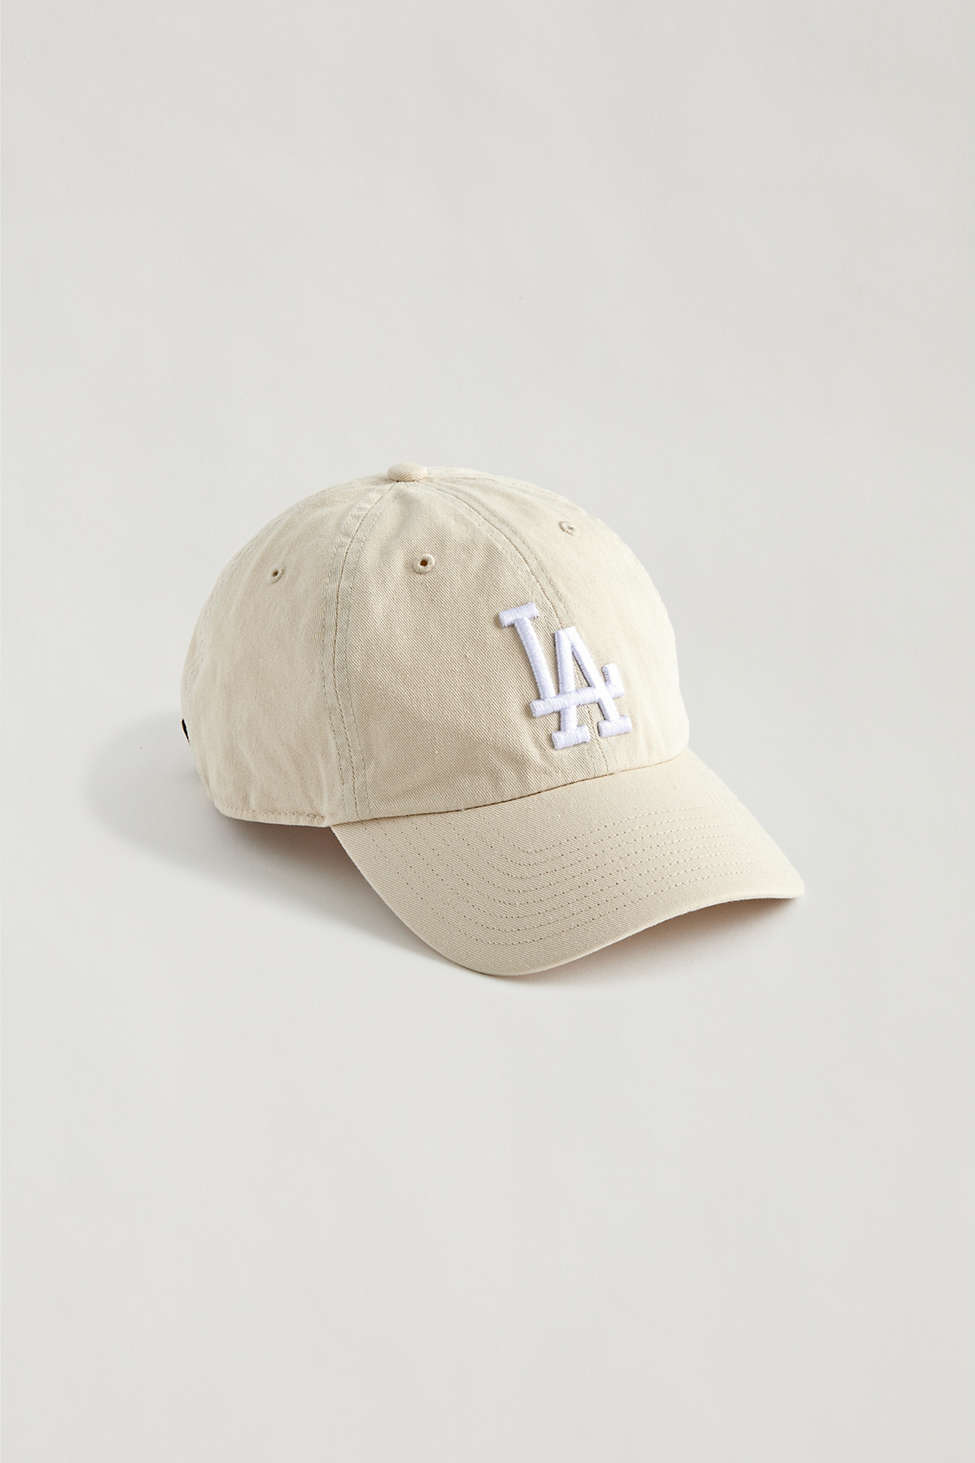 47 Los Angeles Dodgers Baseball Hat In Tan At Urban Outfitters